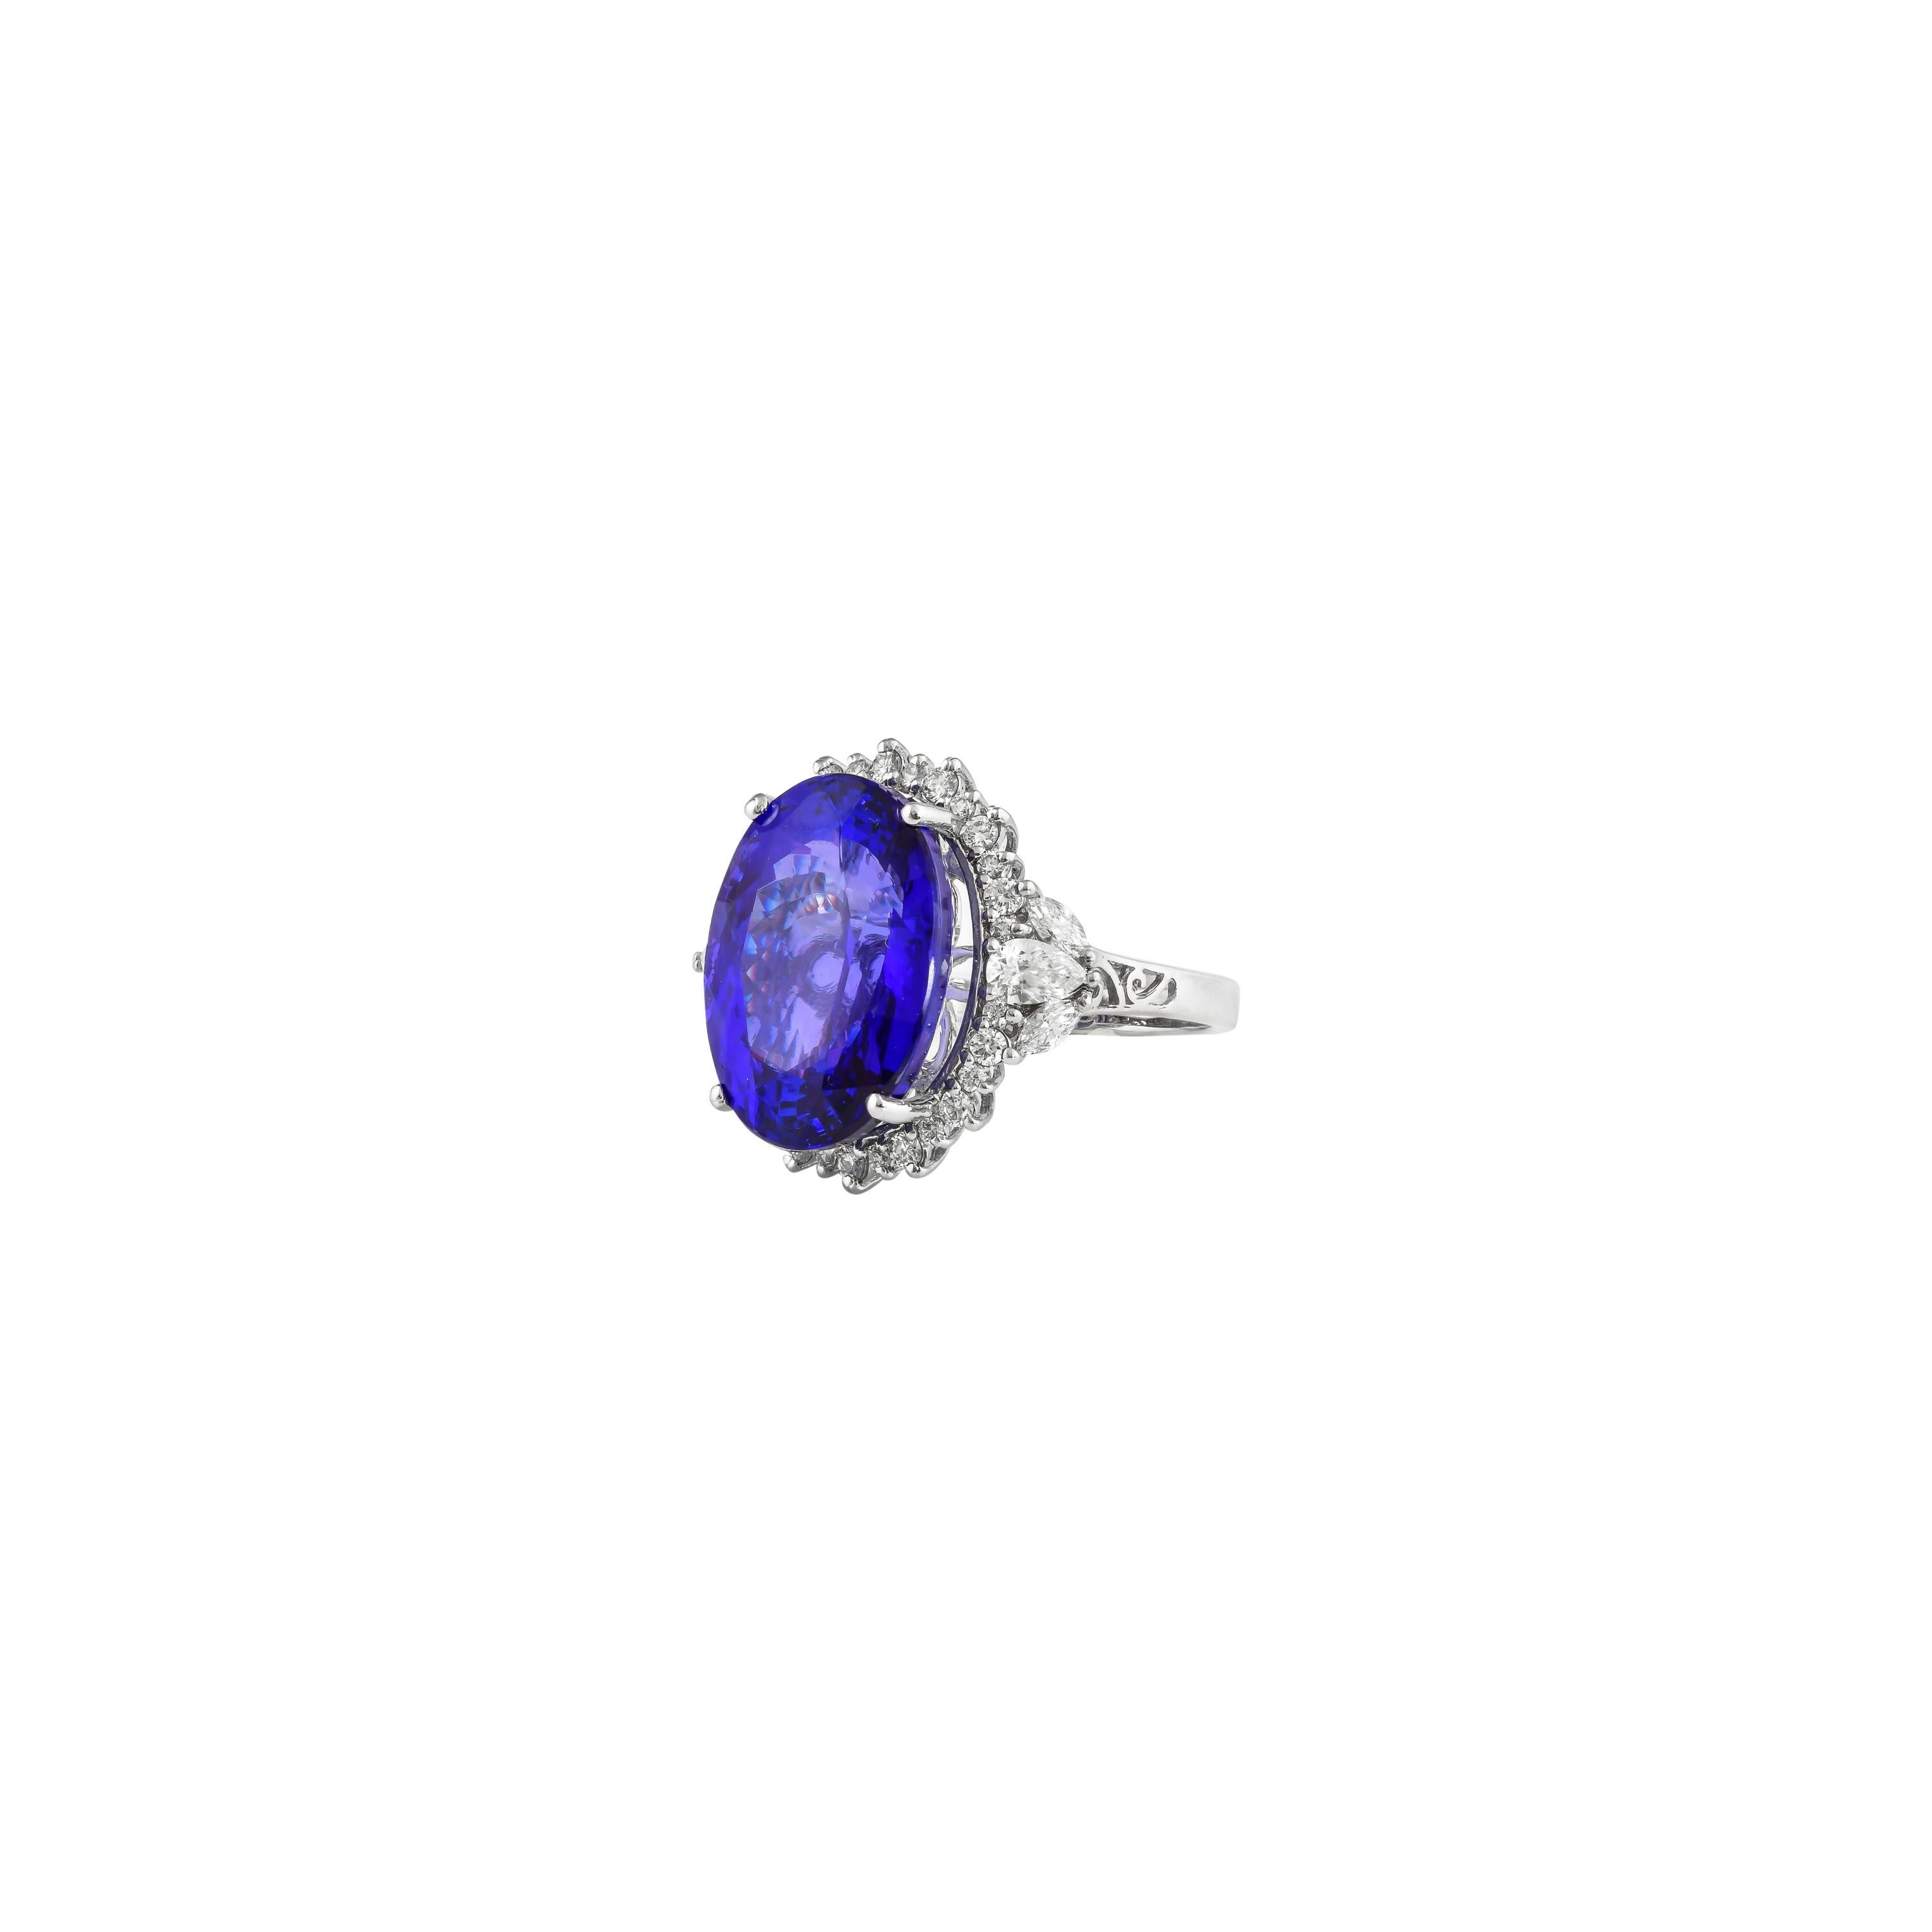 Oval Cut 17.8 Carat Tanzanite and White Diamond Ring in 18 Karat White Gold For Sale